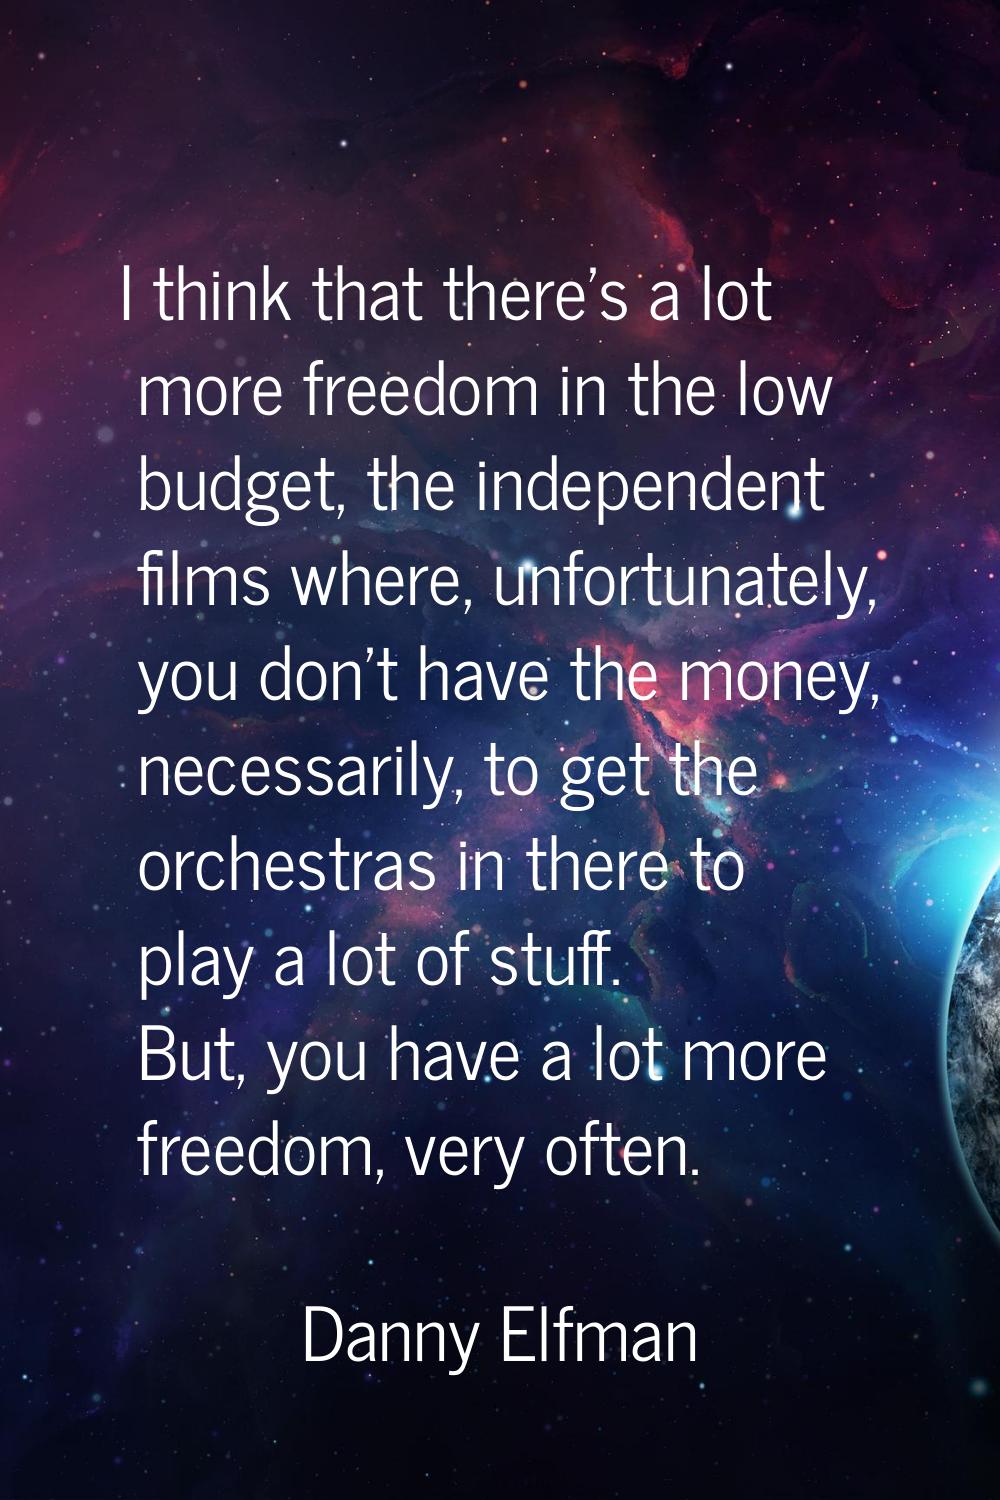 I think that there's a lot more freedom in the low budget, the independent films where, unfortunate